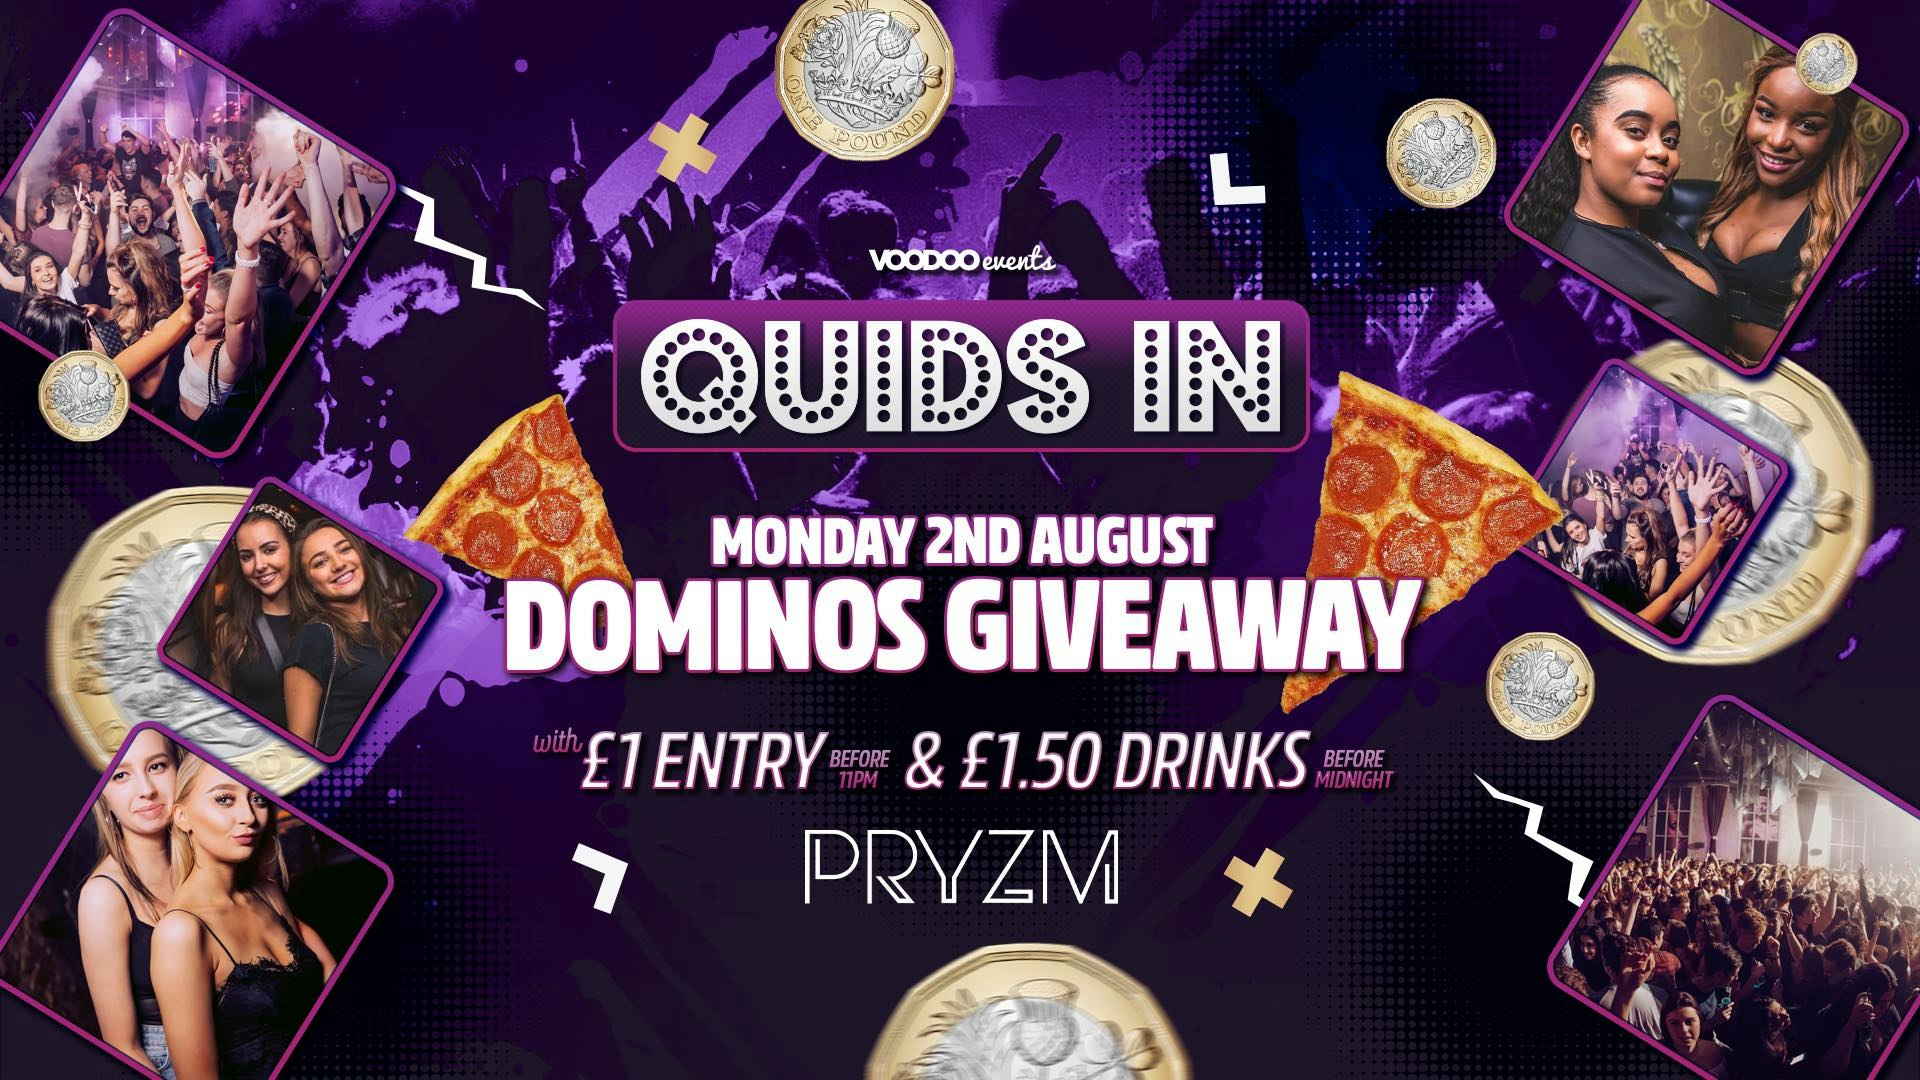 Quids In Mondays at PRYZM – 2nd August DOMINOS GIVEAWAY!